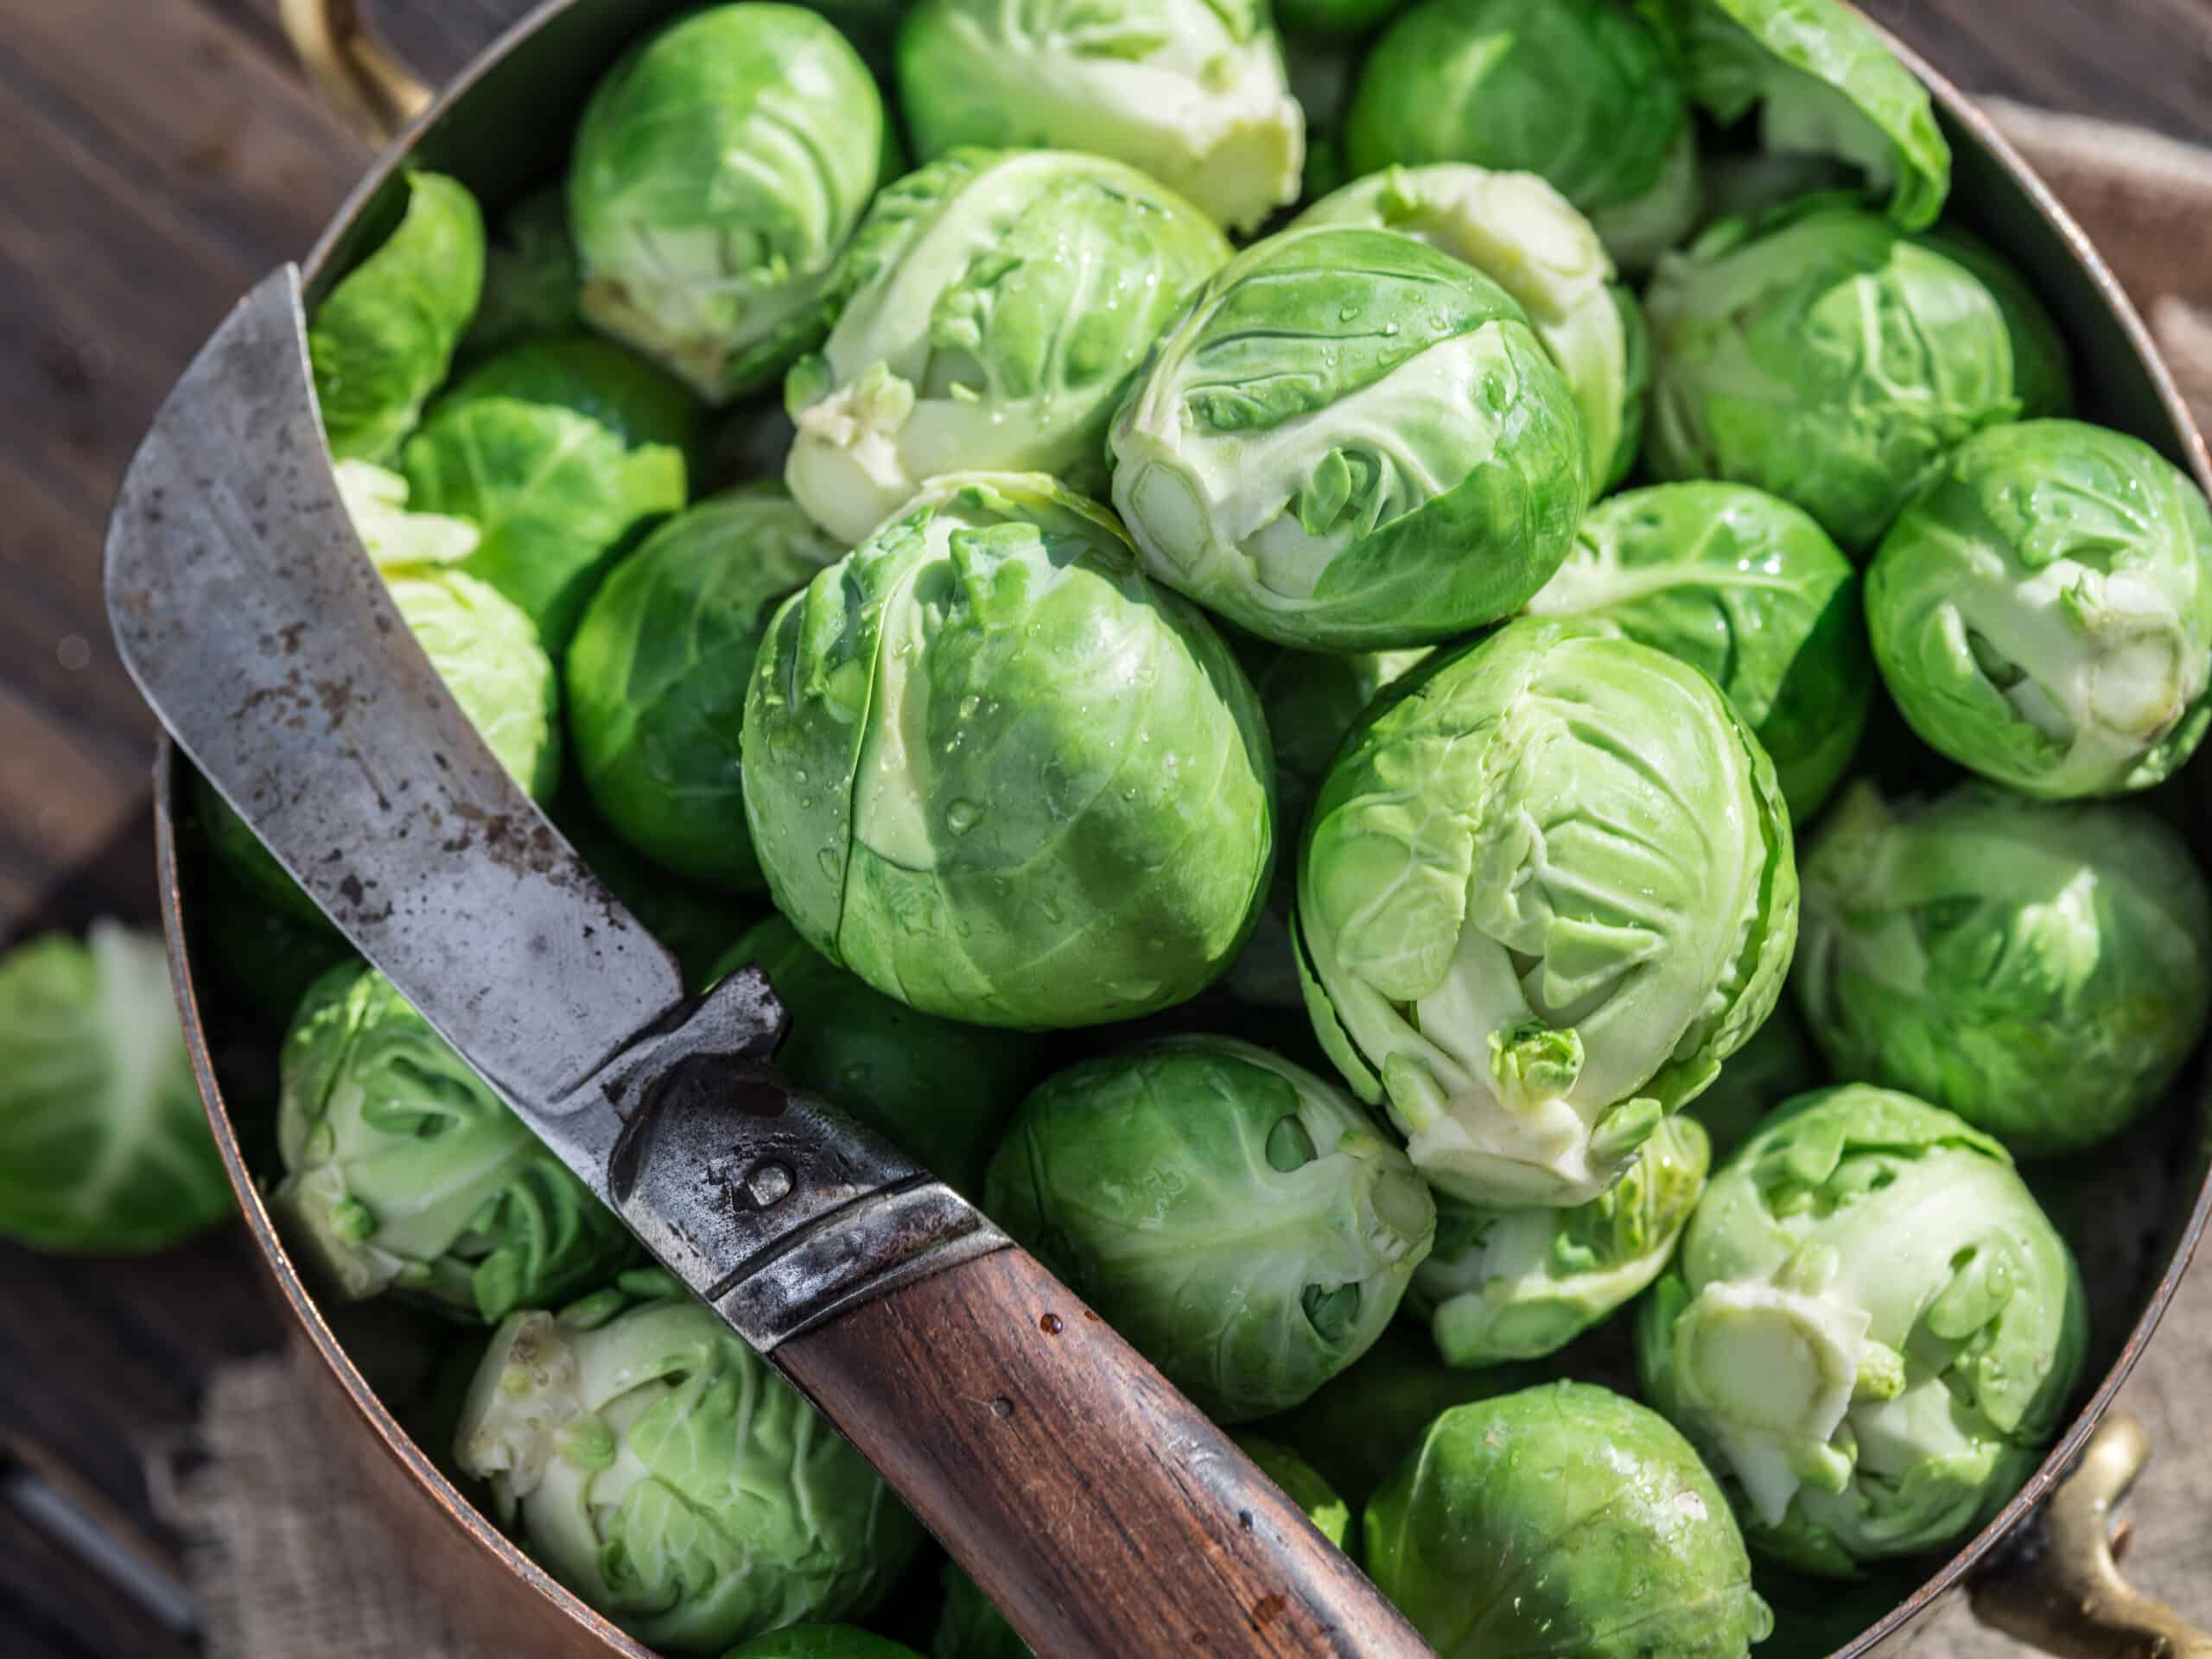 How To Store Brussel Sprouts From The Garden